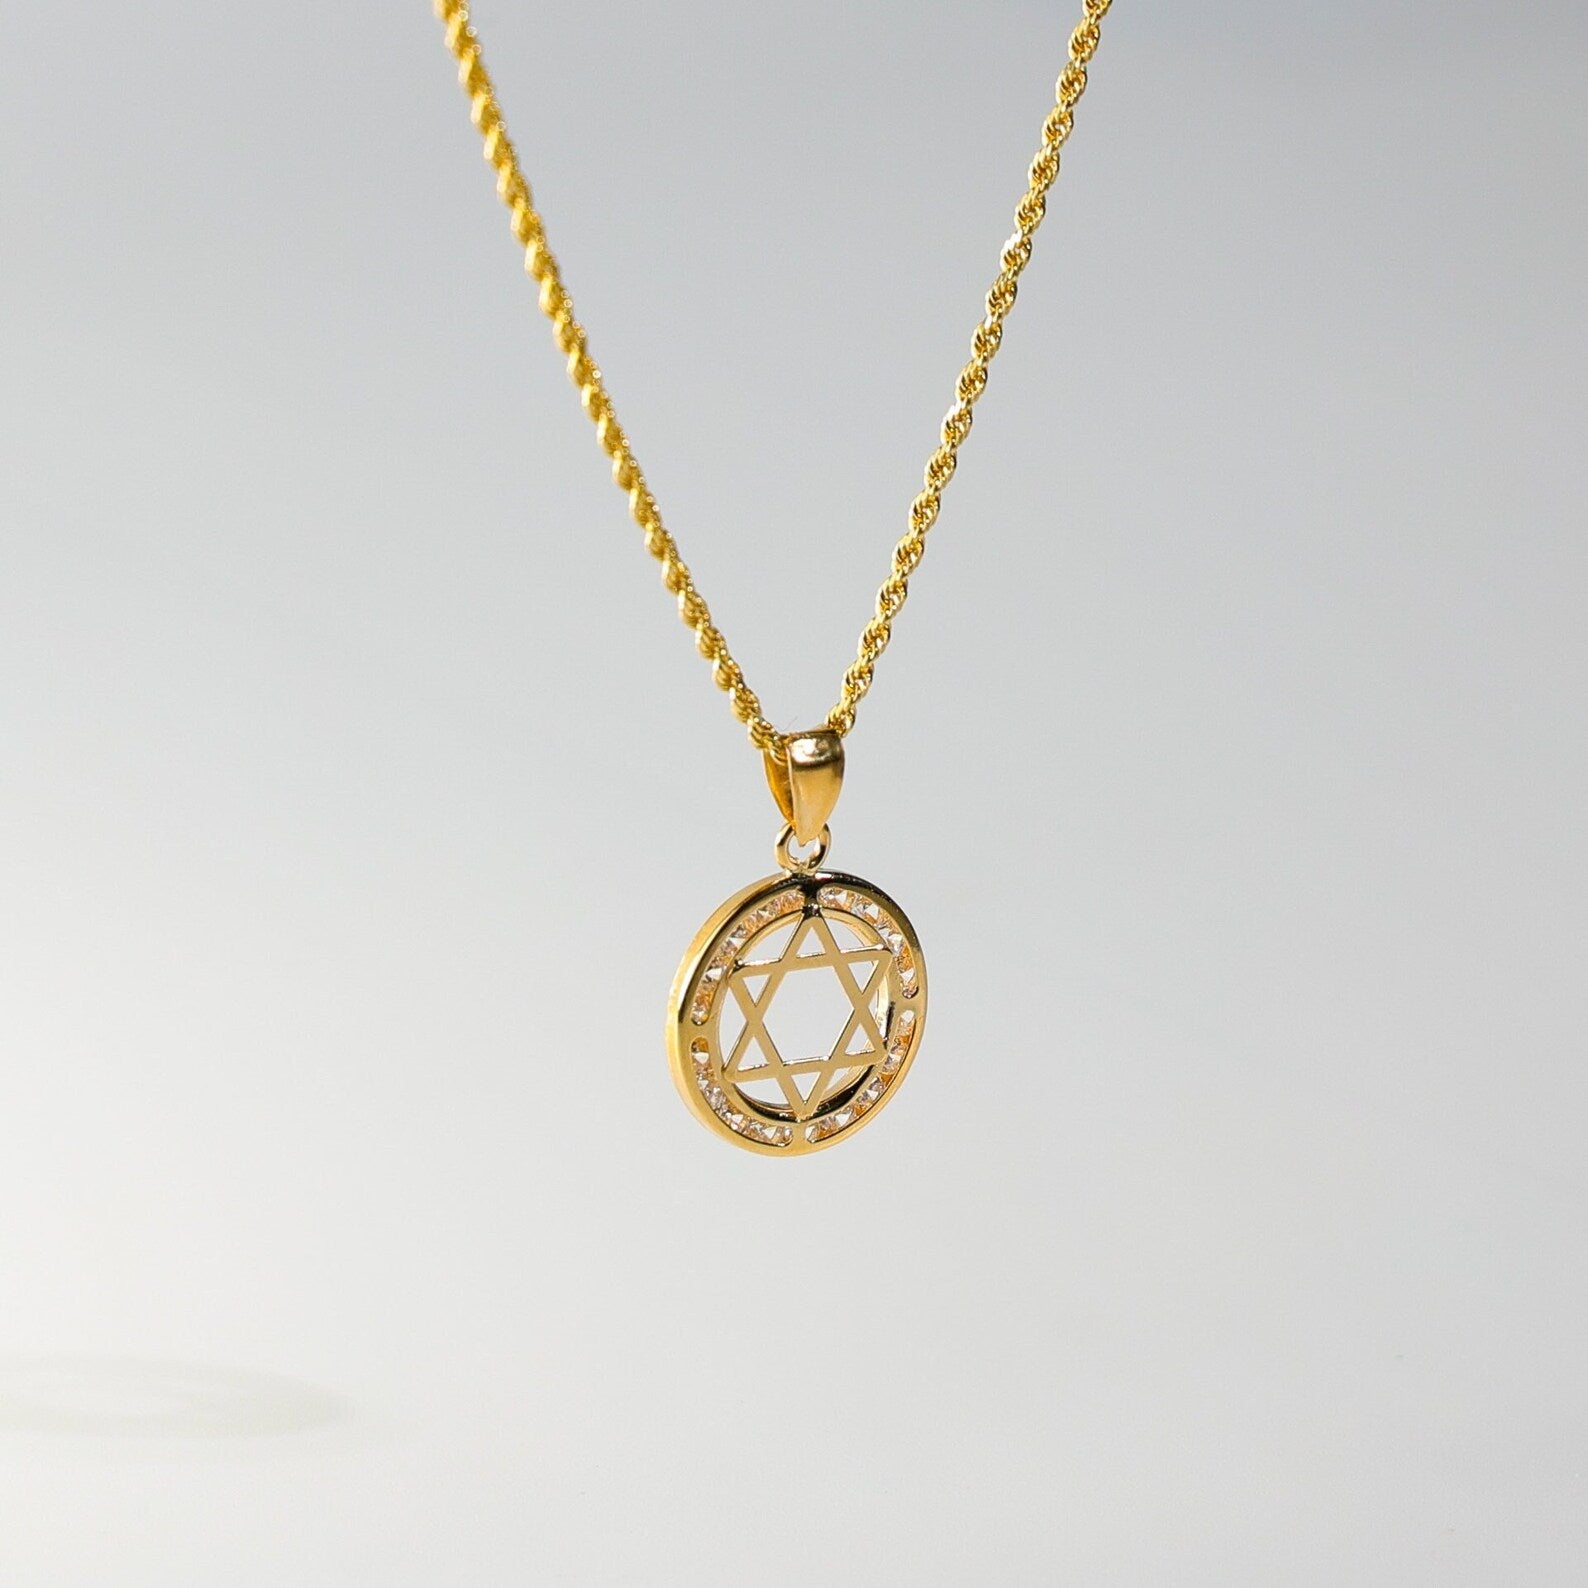 The Star of David Gold Pendant Model-2237 - Charlie & Co. Jewelry